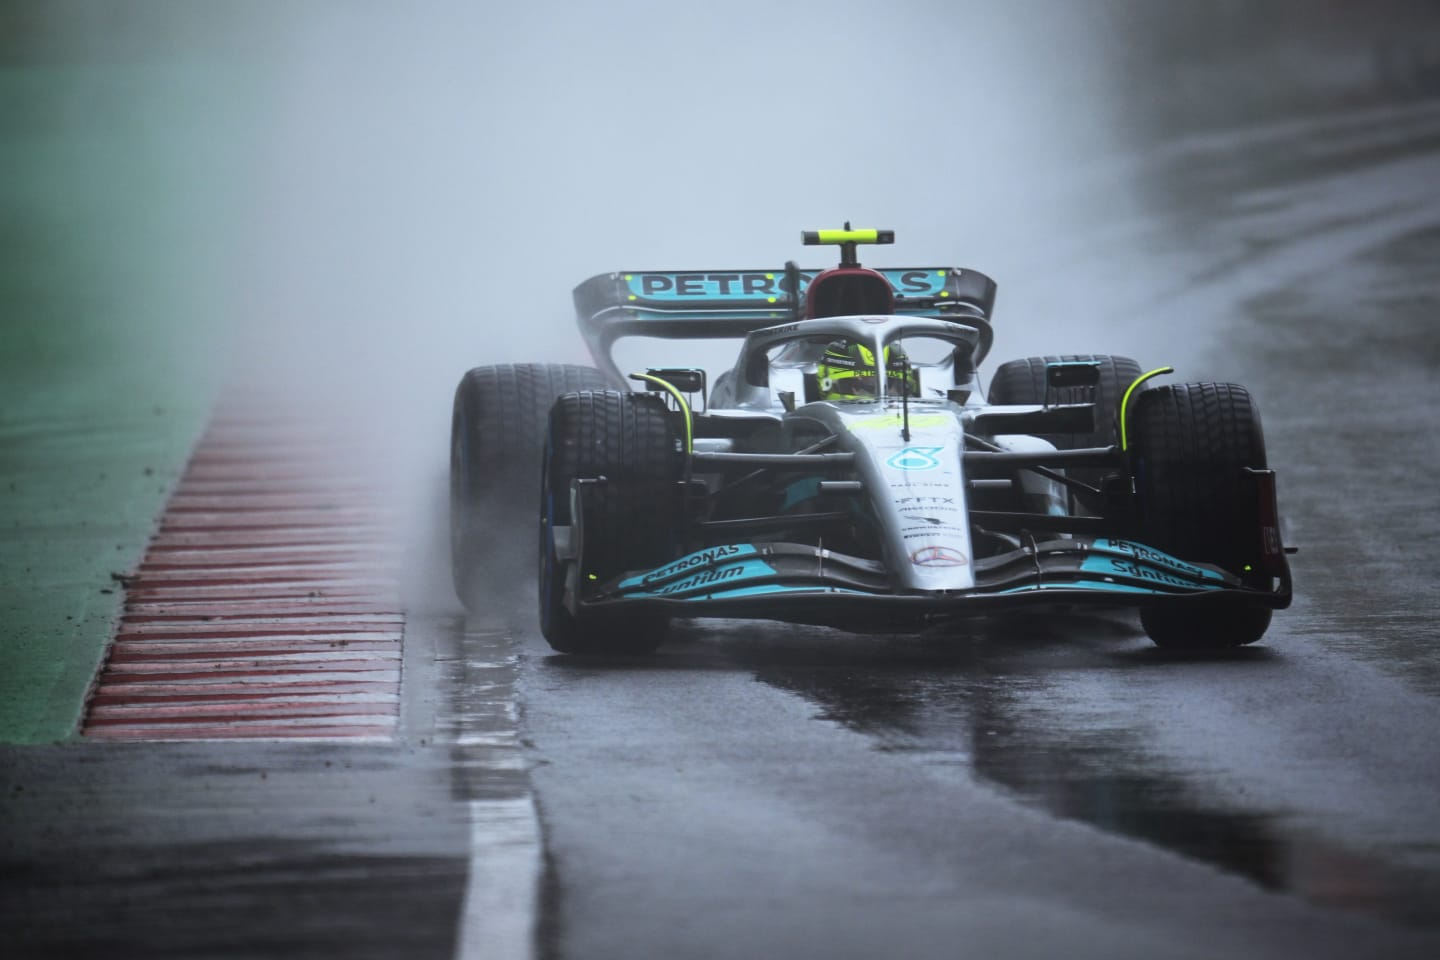 MONTREAL, QUEBEC - JUNE 18: Lewis Hamilton of Great Britain driving the (44) Mercedes AMG Petronas F1 Team W13 in the wet during qualifying ahead of the F1 Grand Prix of Canada at Circuit Gilles Villeneuve on June 18, 2022 in Montreal, Quebec. (Photo by Clive Mason/Getty Images)